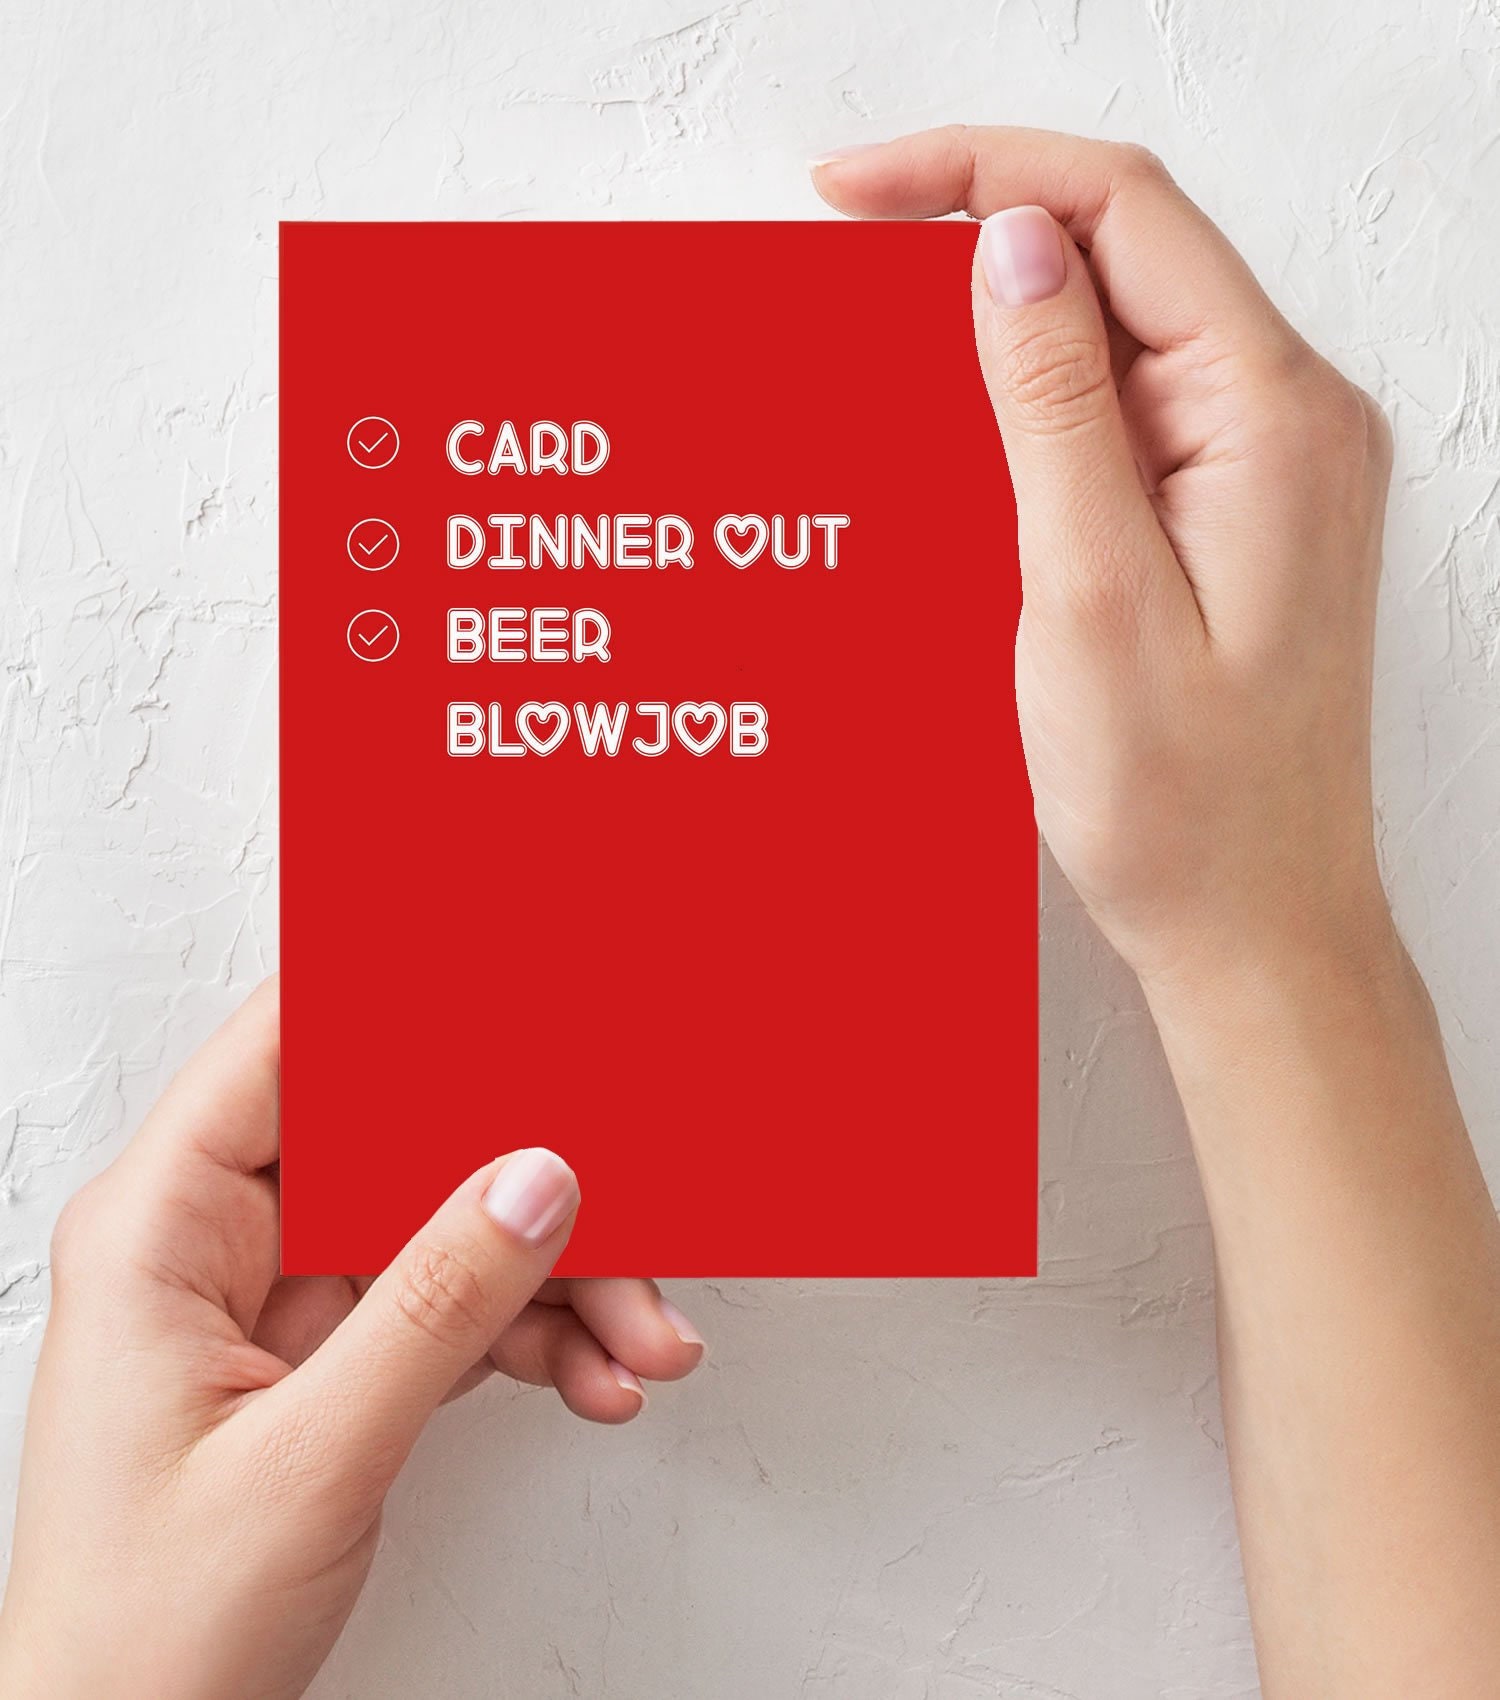 Card Dinner Out Beer Blowjob Funny Rude Offensive